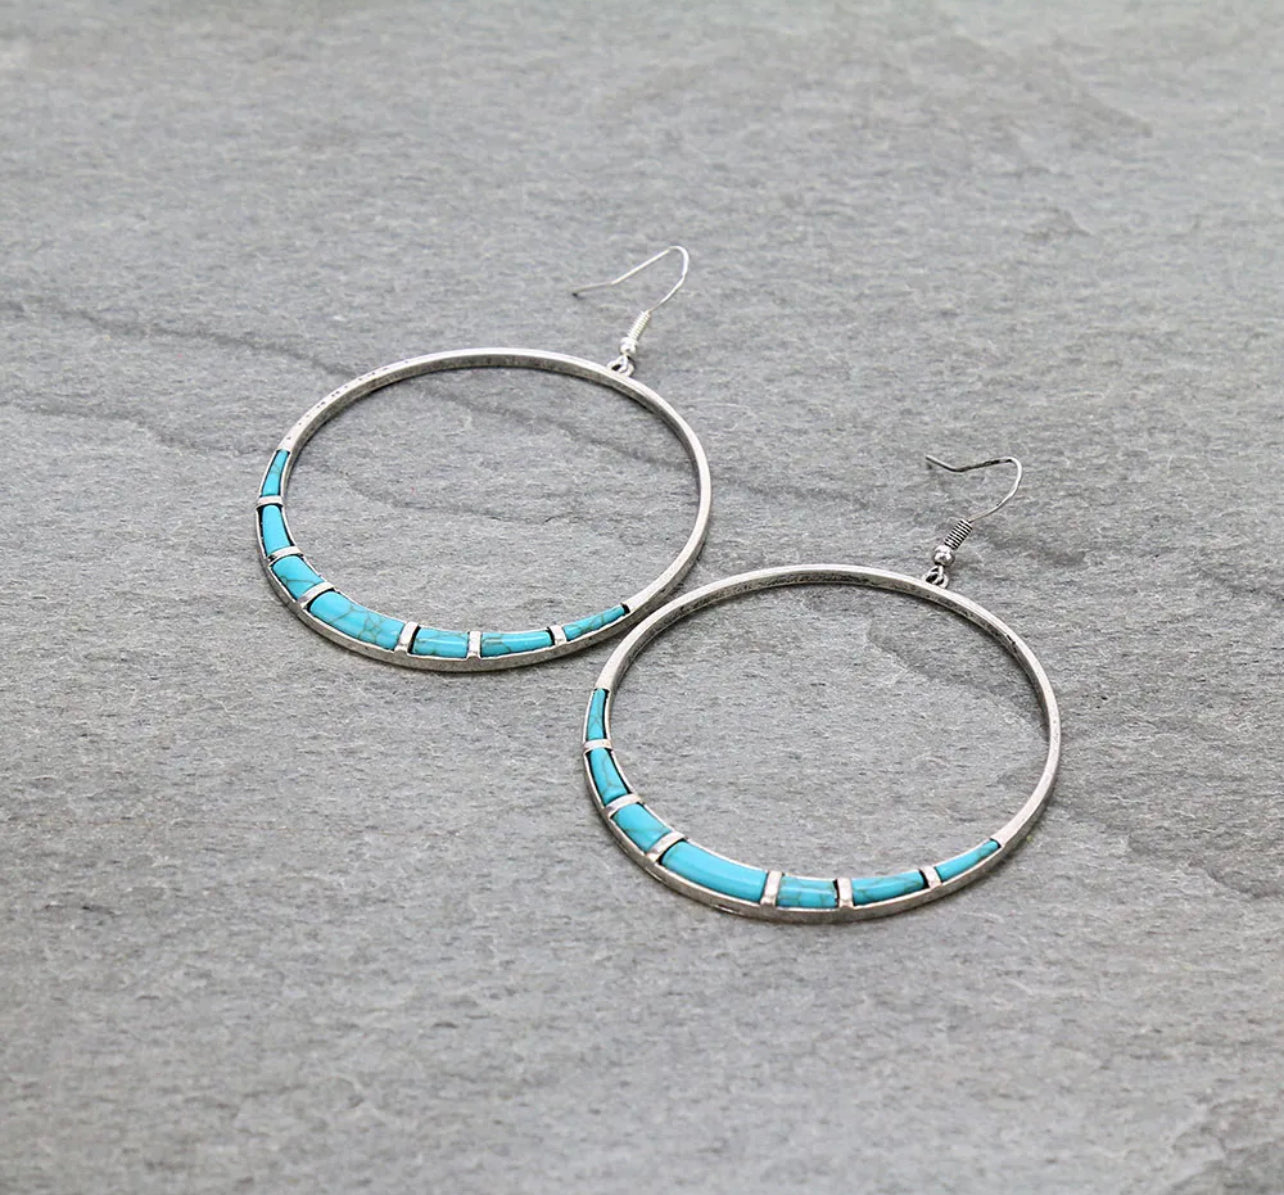 The Wild Child Hoops